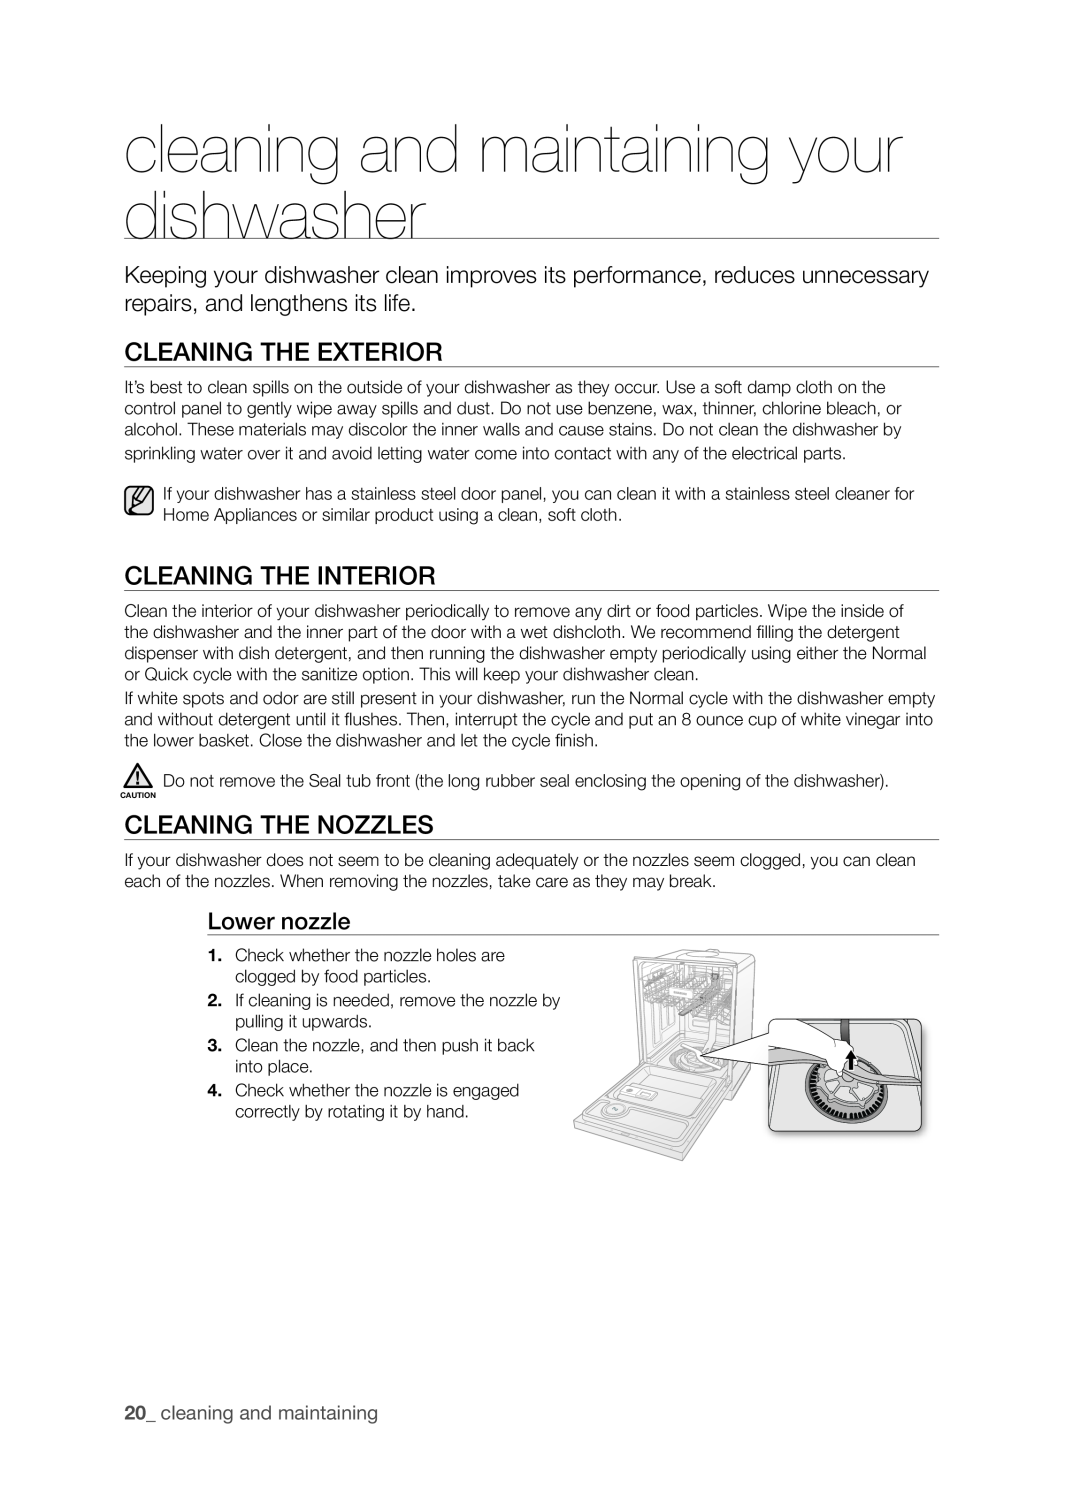 Samsung DMT800 Series cleaning and maintaining your dishwasher, Cleaning the exterior, Cleaning the interior, Lower nozzle 